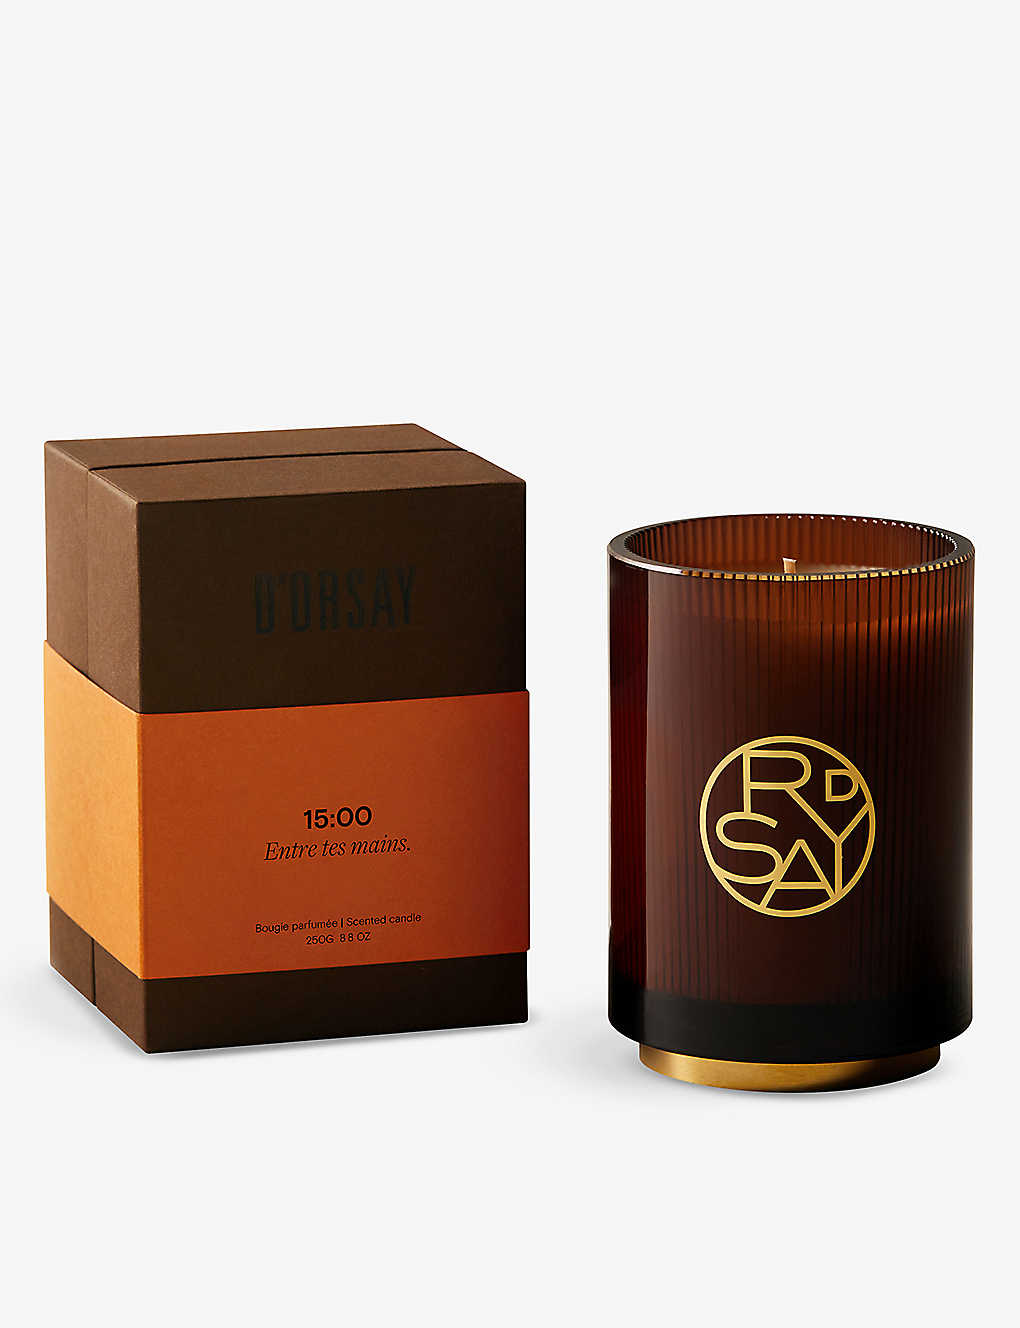 D'orsay 15:00 Scented Candle 250g